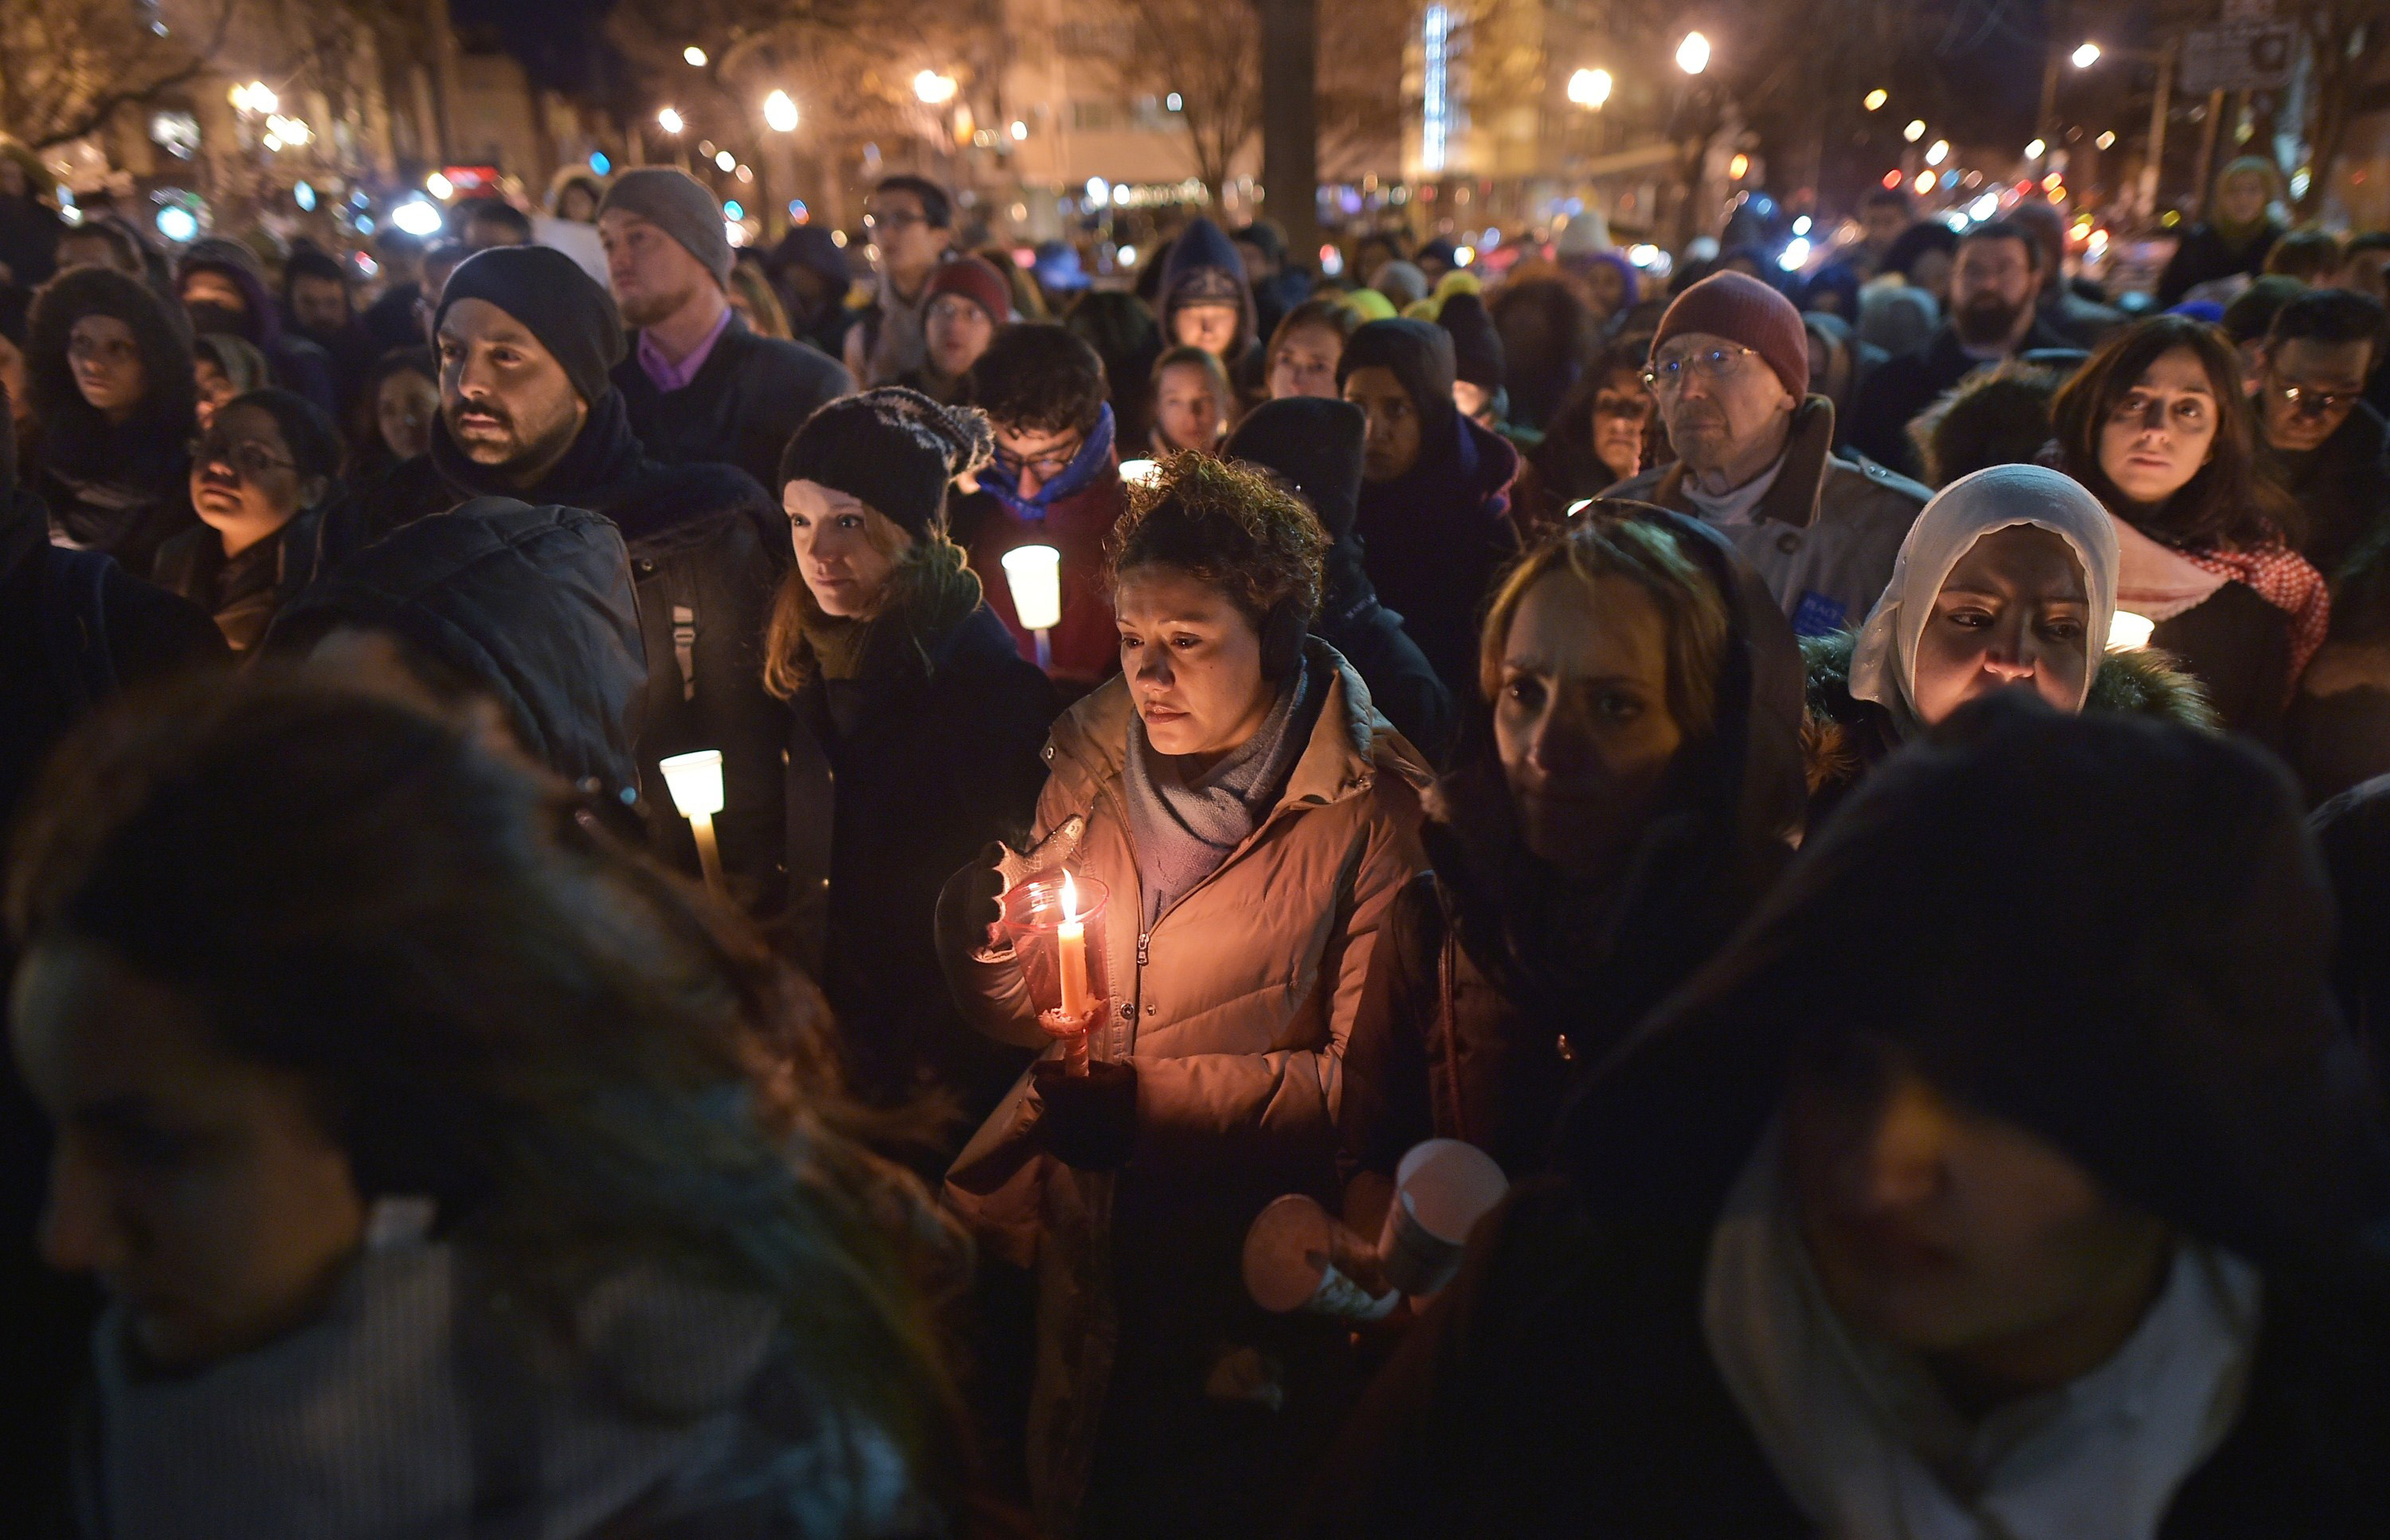 People take part in a vigil for three young Muslims killed in Chapel Hill, North Carolina, at Dupont Circle on February 12, 2015 in Washington, DC. The three were killed by a neighbour in wha